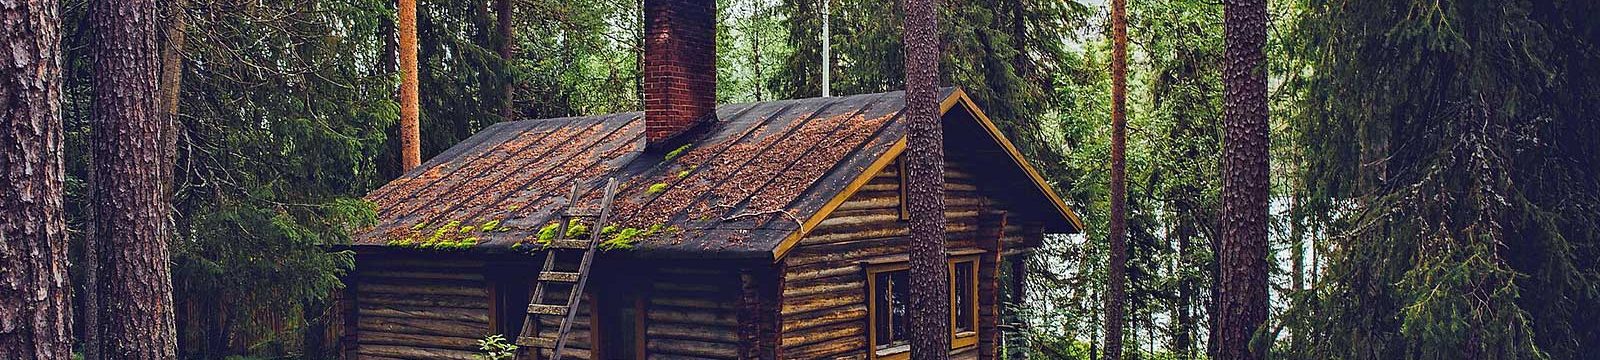 Home office cabin in the woods.